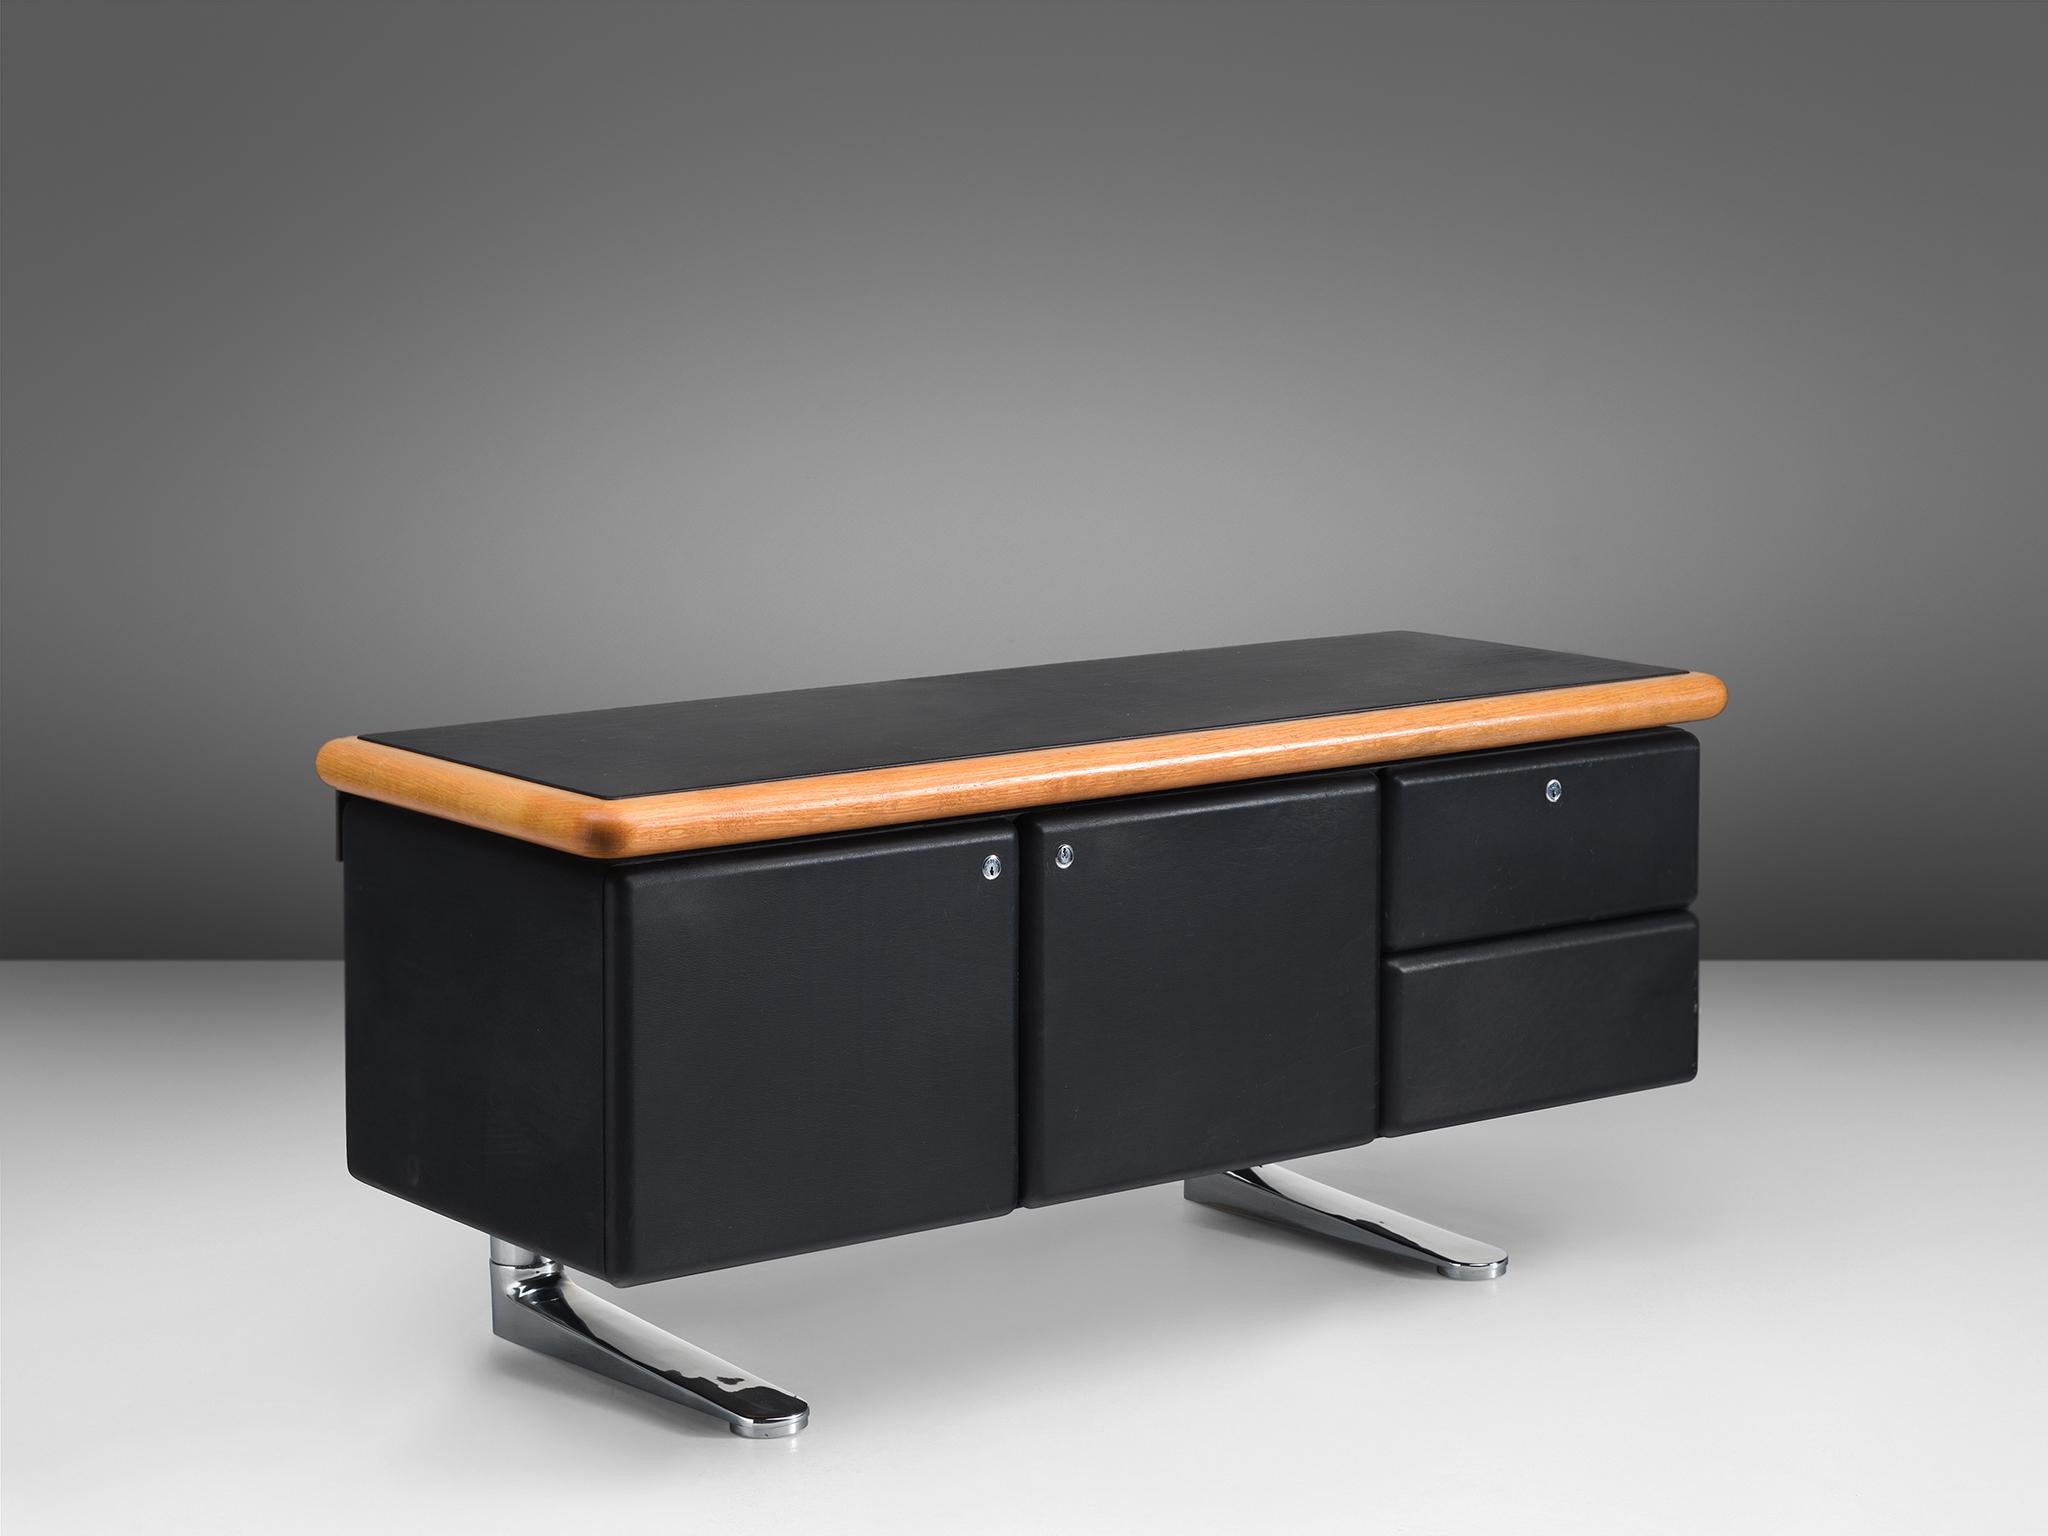 Warren Platner for Knoll, sideboard, metal, oak, leather, United States, design 1973.

This sturdy credenza is designed by the American modernist Warren Platner. He is mostly known for his airy metal, sculptural lounge chairs. In a way it is